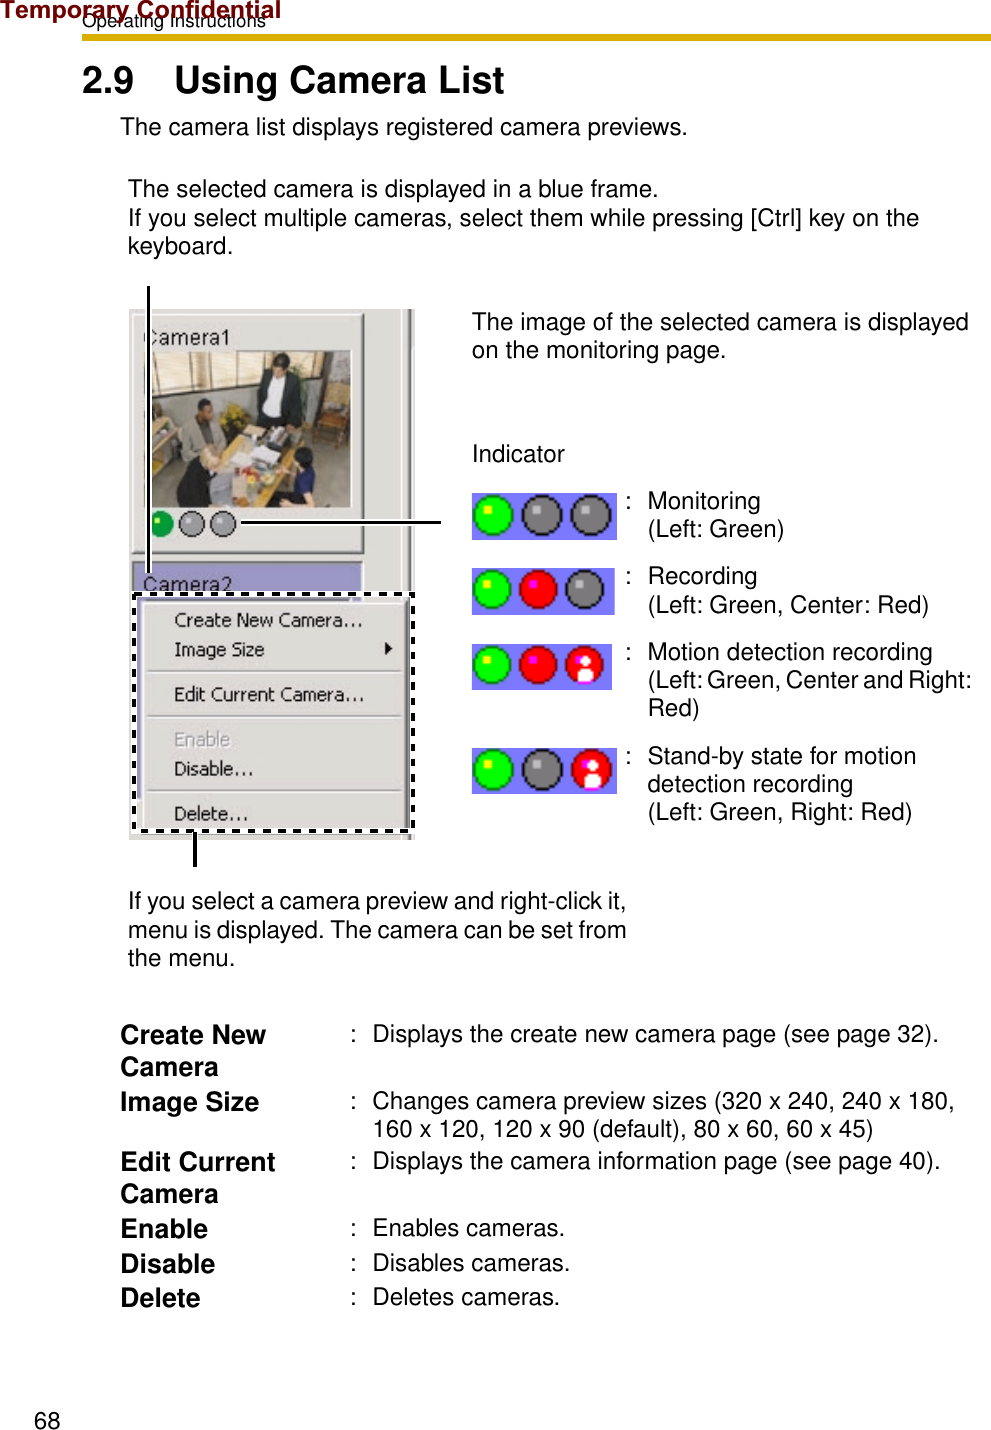 Operating Instructions682.9 Using Camera ListThe camera list displays registered camera previews.The selected camera is displayed in a blue frame. If you select multiple cameras, select them while pressing [Ctrl] key on the keyboard.The image of the selected camera is displayed on the monitoring page.Indicator: Monitoring (Left: Green): Recording (Left: Green, Center: Red): Motion detection recording (Left: Green, Center and Right: Red): Stand-by state for motion detection recording (Left: Green, Right: Red)If you select a camera preview and right-click it, menu is displayed. The camera can be set from the menu.Create New Camera: Displays the create new camera page (see page 32).Image Size : Changes camera preview sizes (320 x 240, 240 x 180, 160 x 120, 120 x 90 (default), 80 x 60, 60 x 45)Edit Current Camera: Displays the camera information page (see page 40).Enable : Enables cameras.Disable : Disables cameras.Delete : Deletes cameras.Temporary Confidential